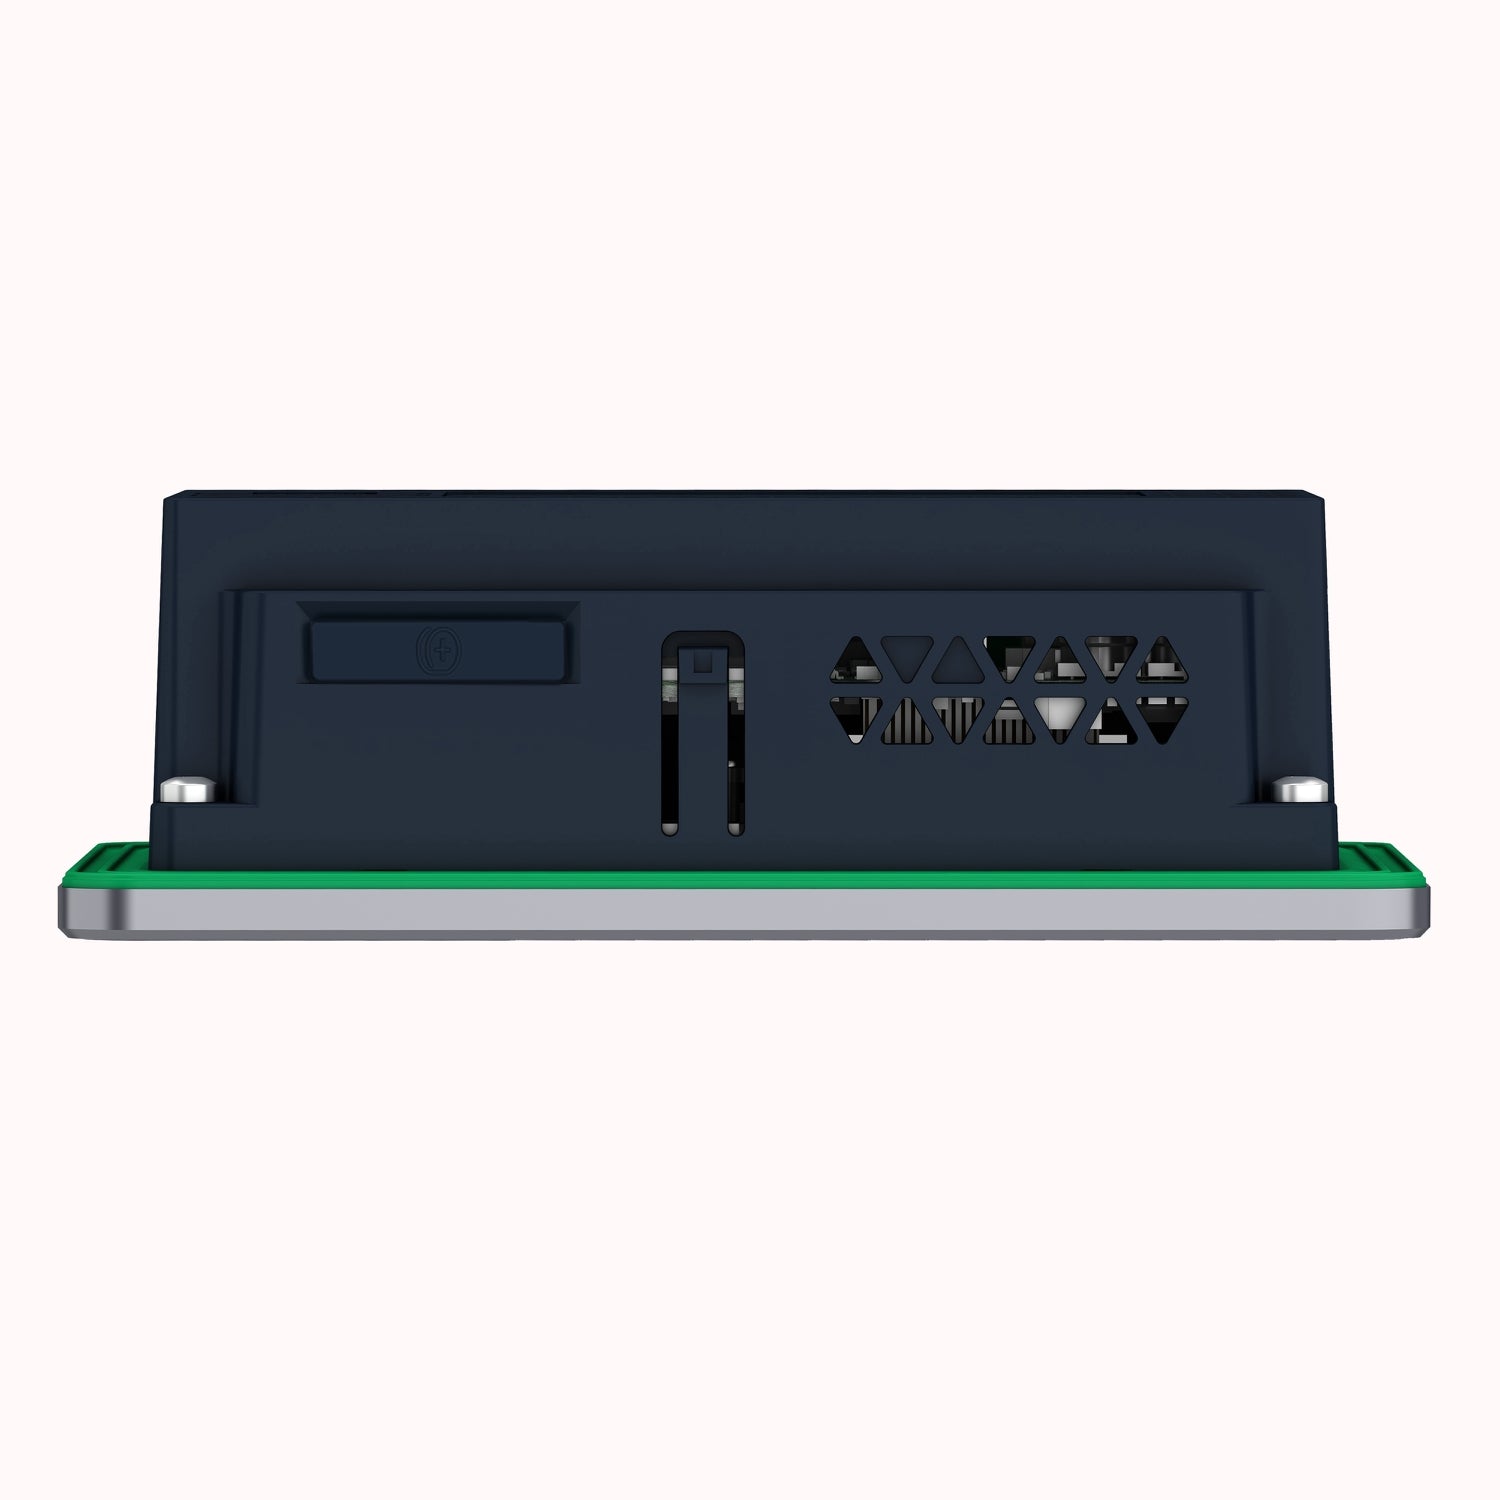 HMIST6200 | Schneider Electric Touch panel screen, Harmony ST6, 4inch wide display, 1COM, 1Ethernet, USB host and device, 24V DC